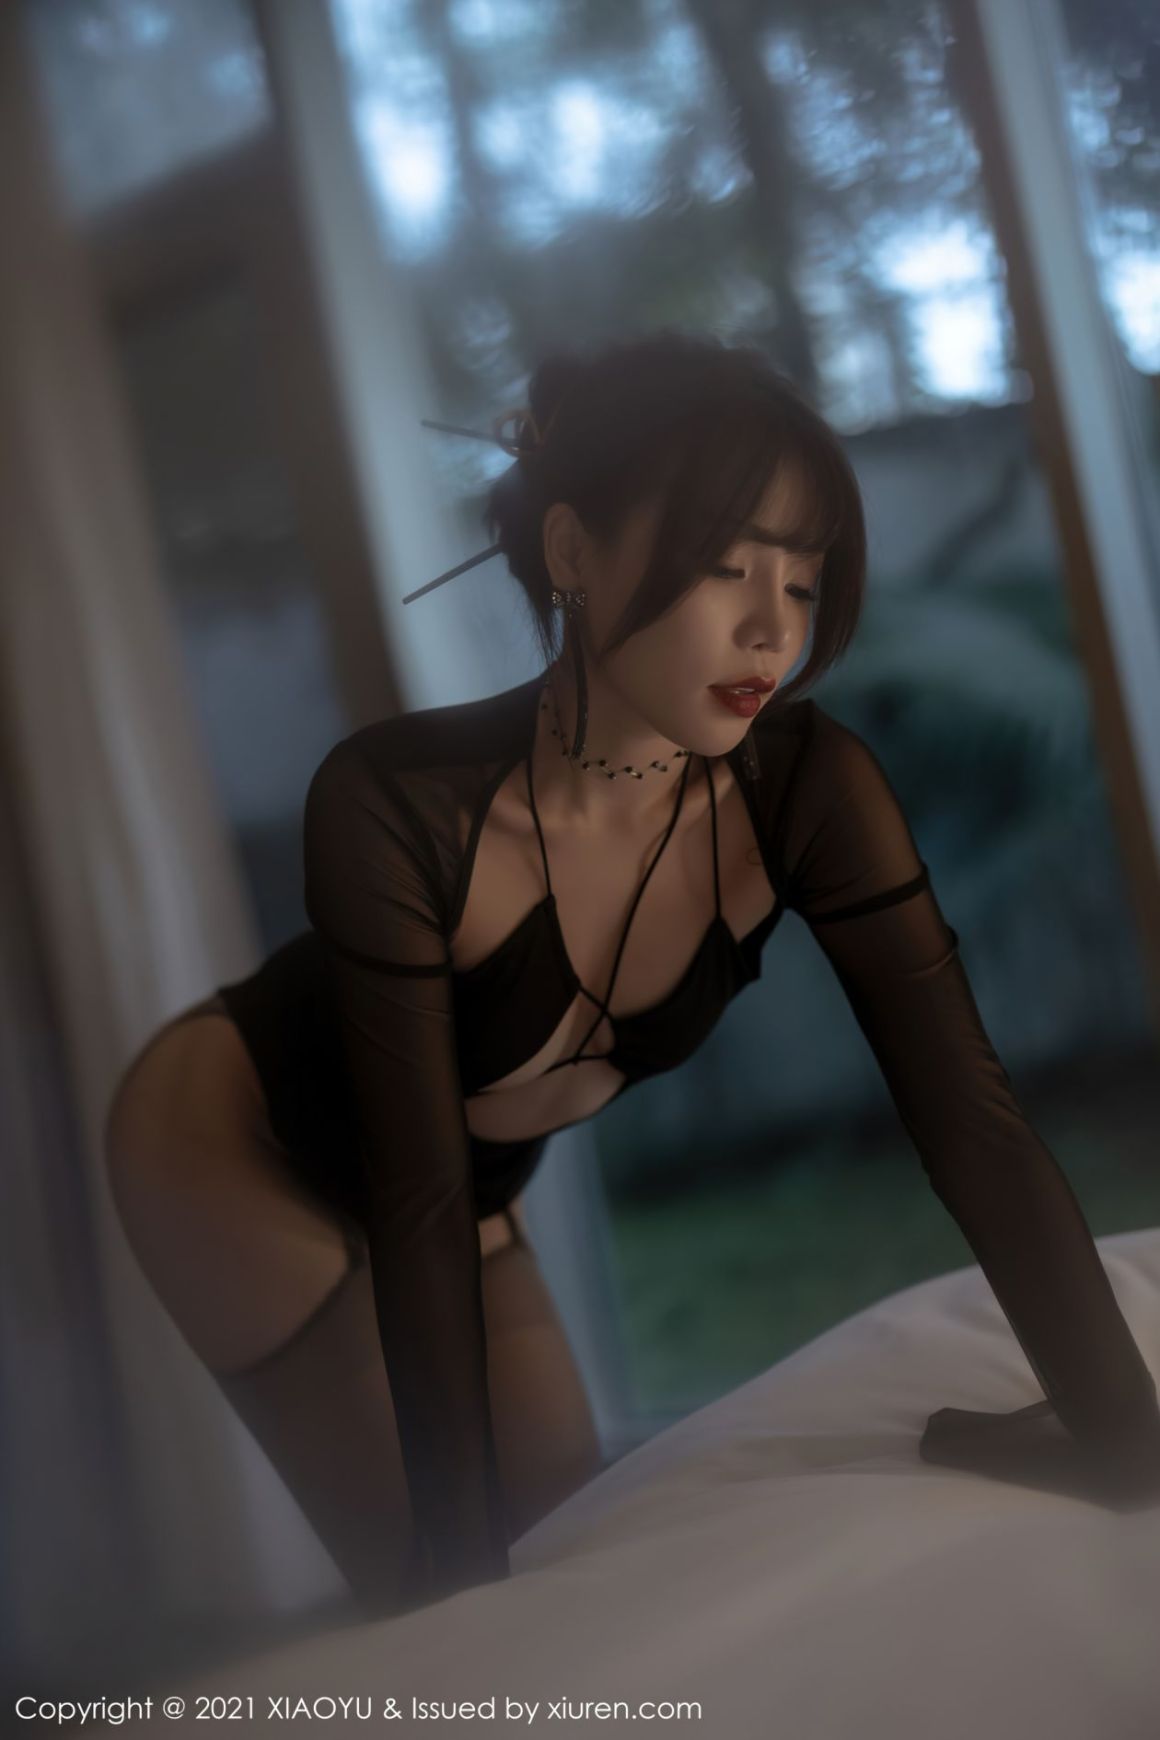 AsianOnlyfans.com 32 109 20211006